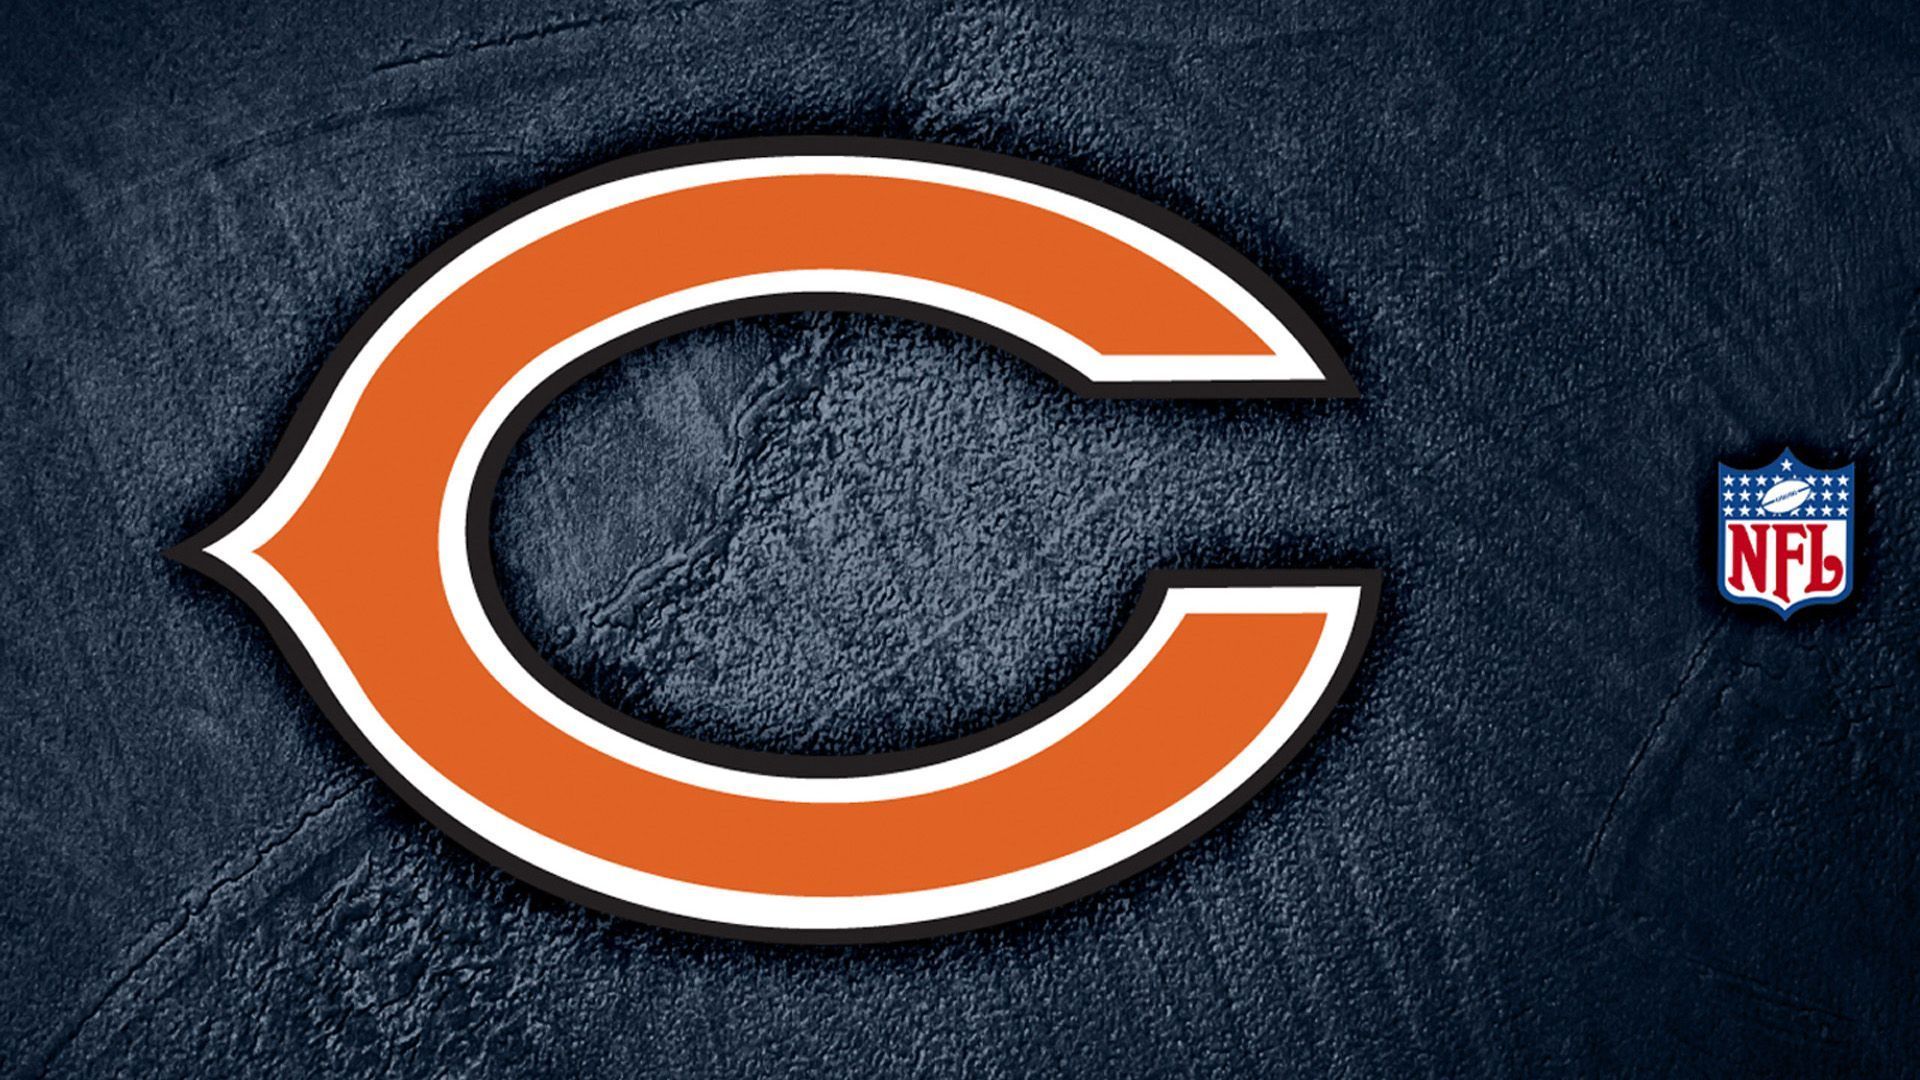 13 Chicago Bears HD Wallpapers | Backgrounds - Wallpaper Abyss